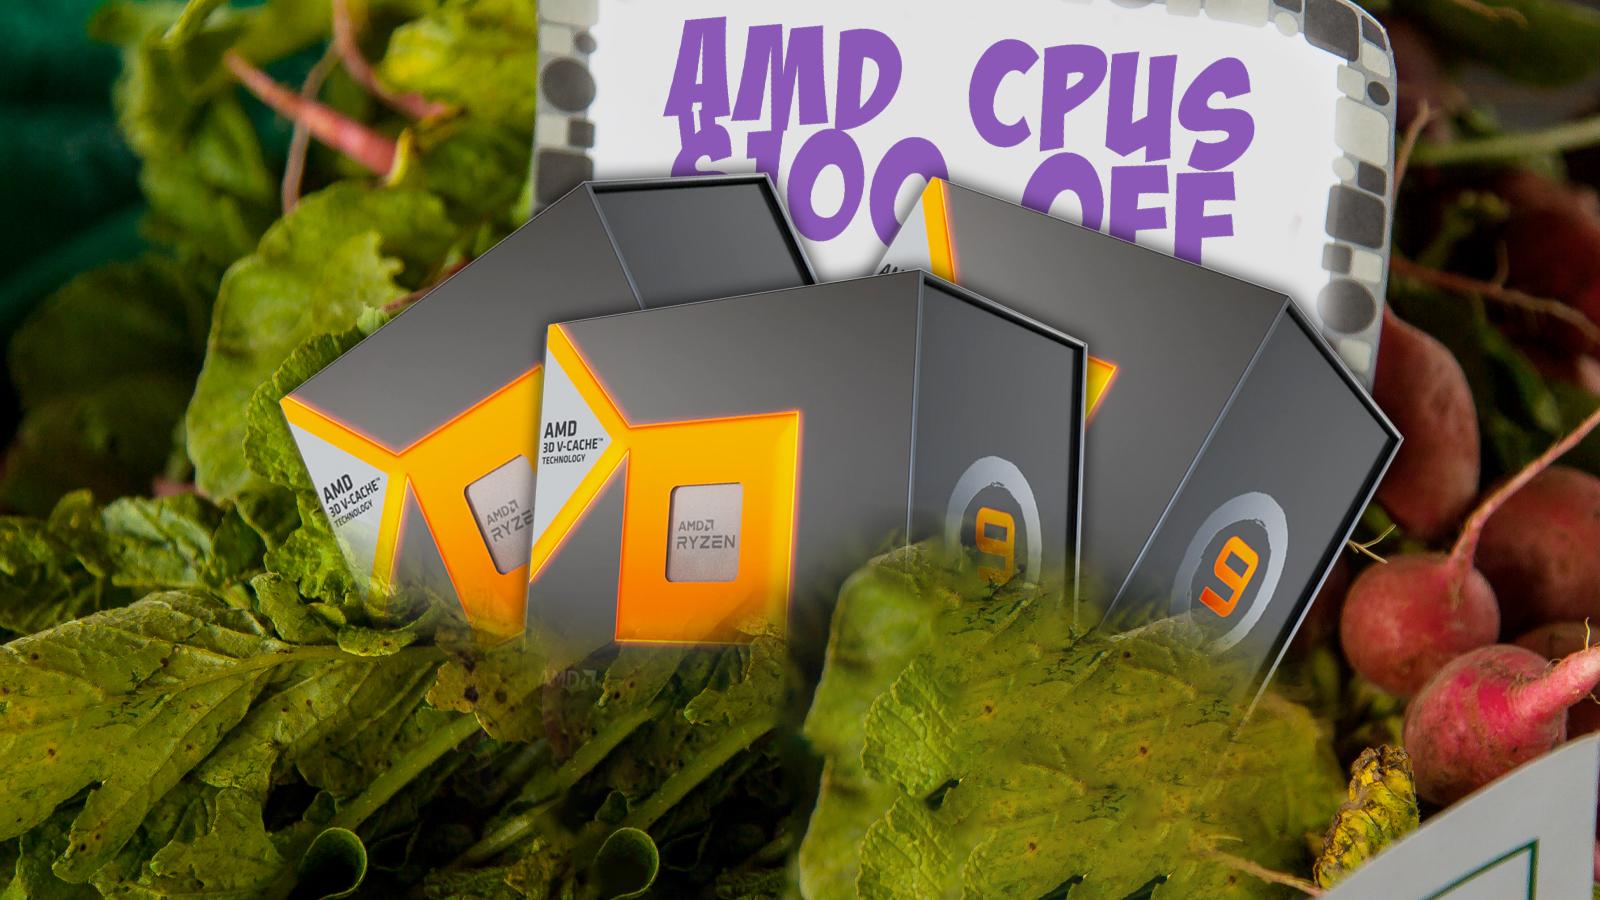 amd cpus being sold a food market with a sign saying they're 100 dollars off